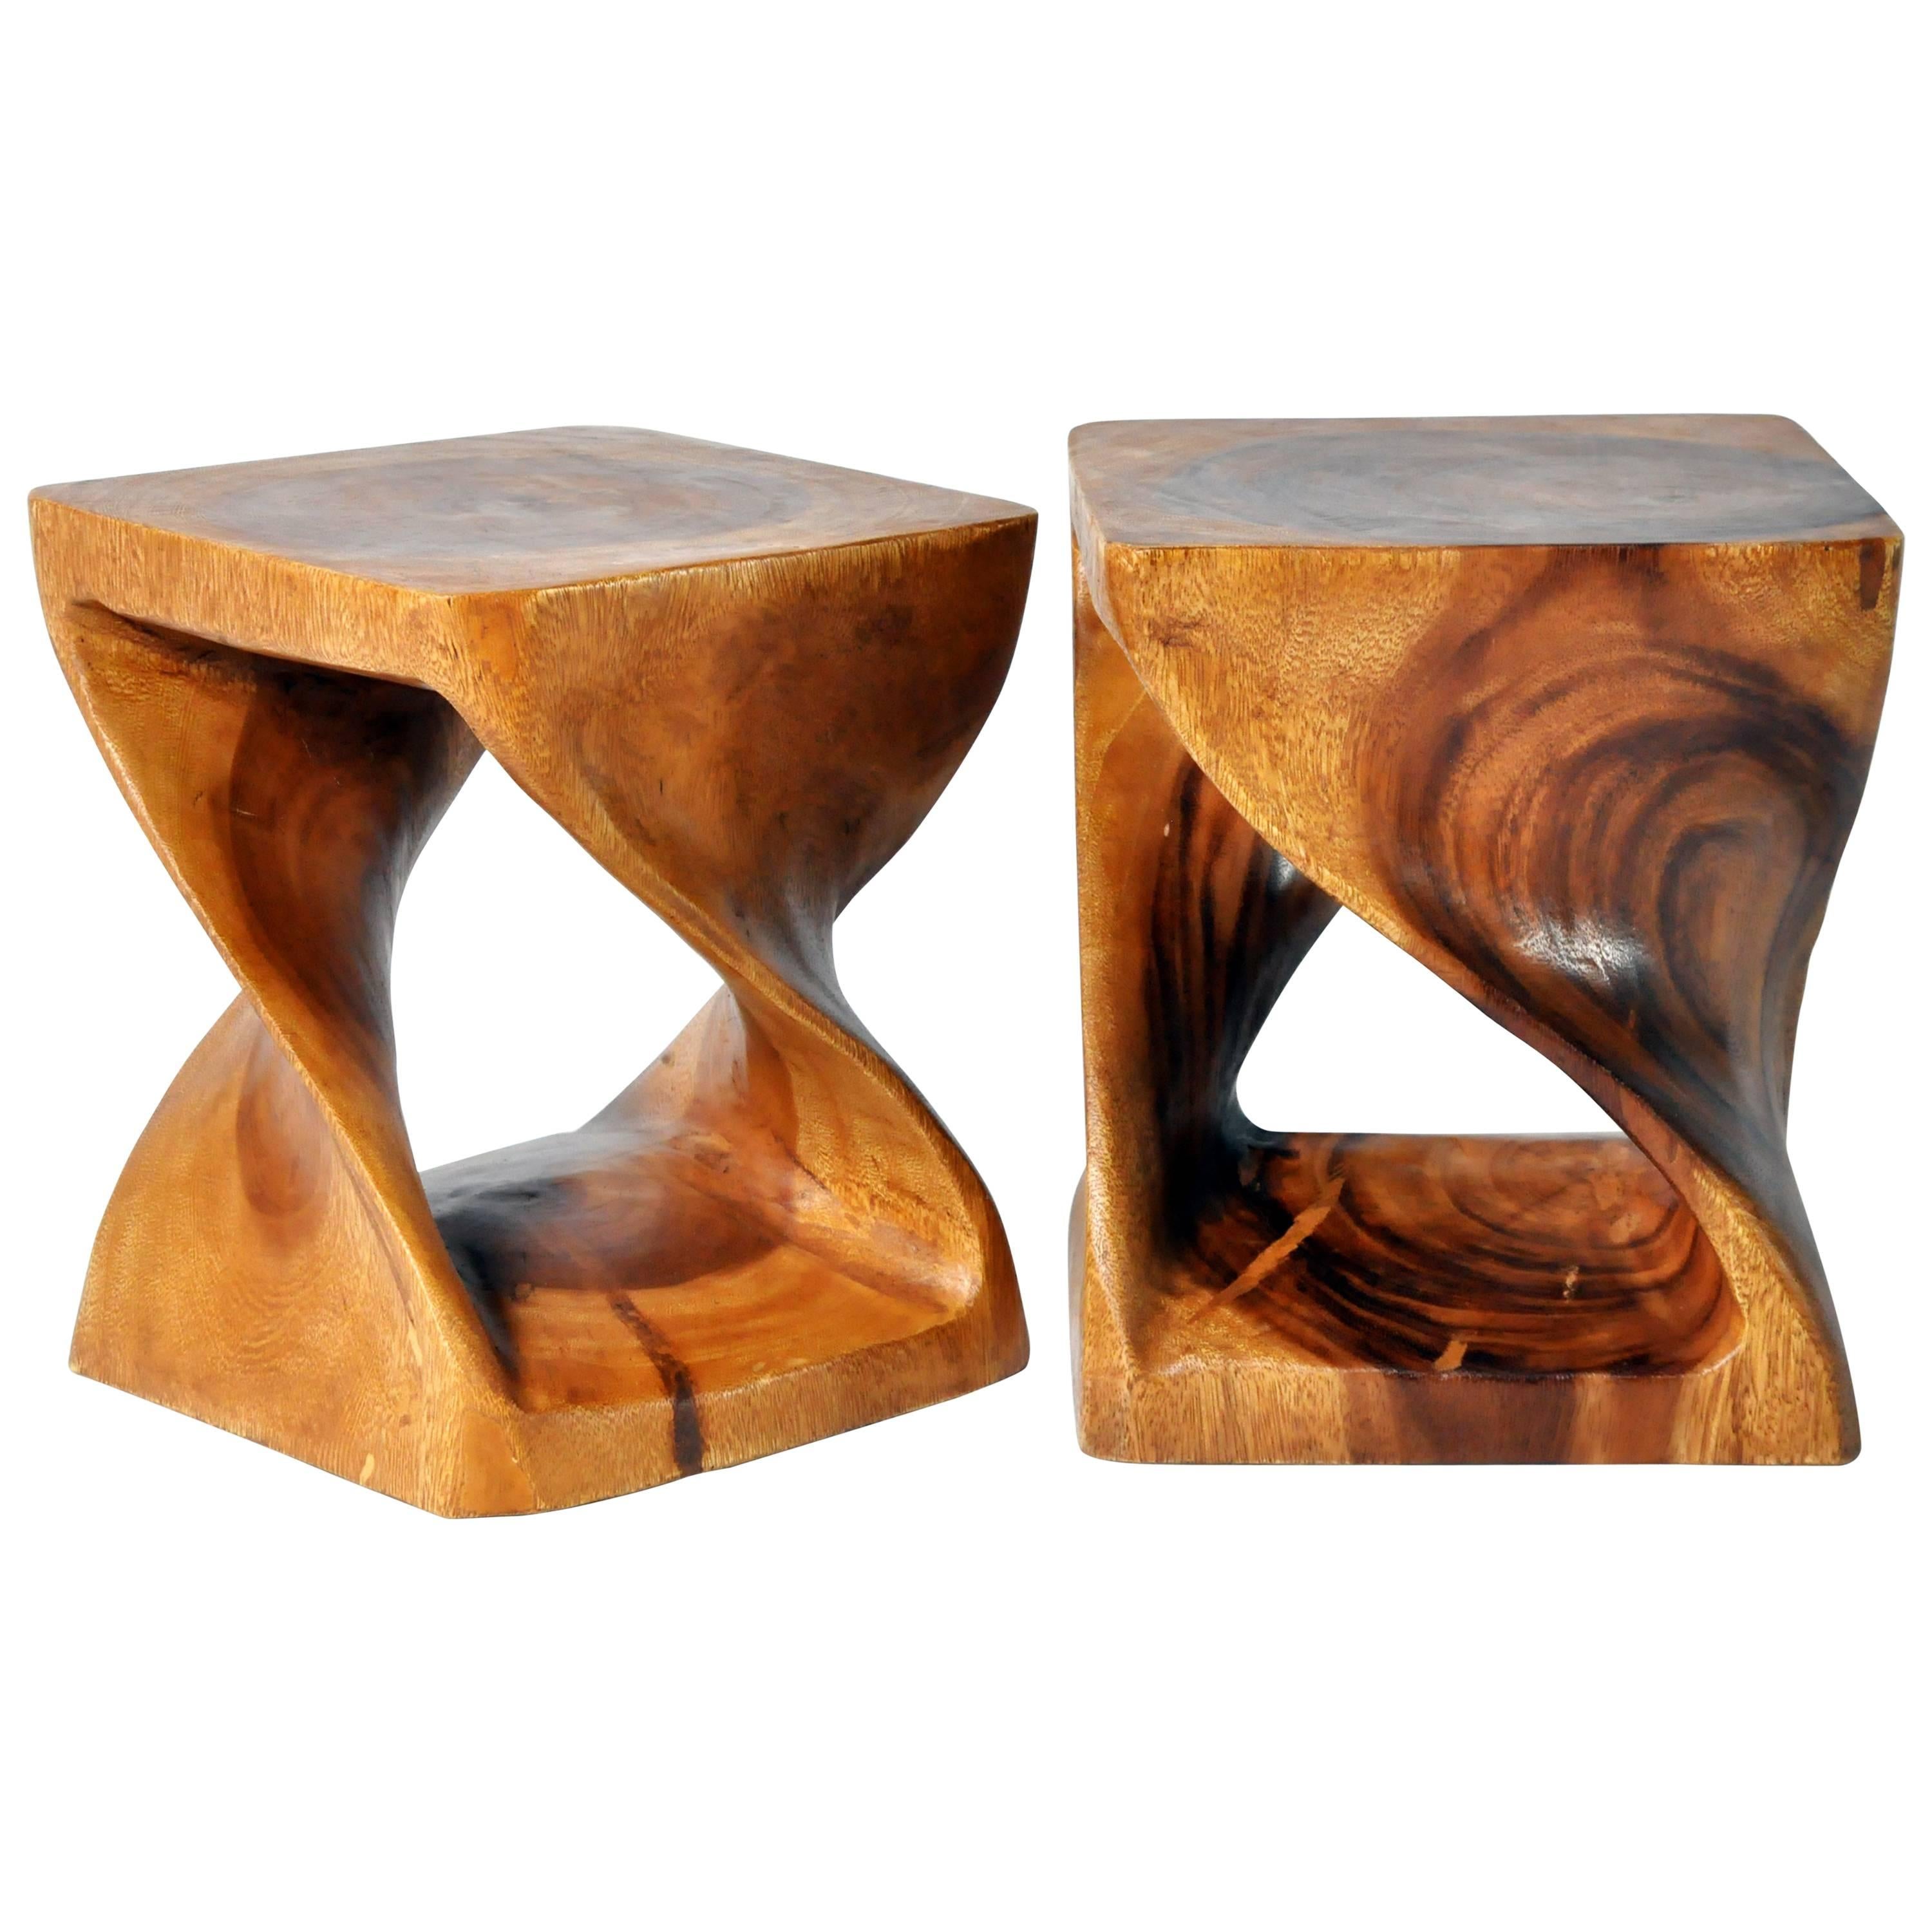 Hand-Carved Stools